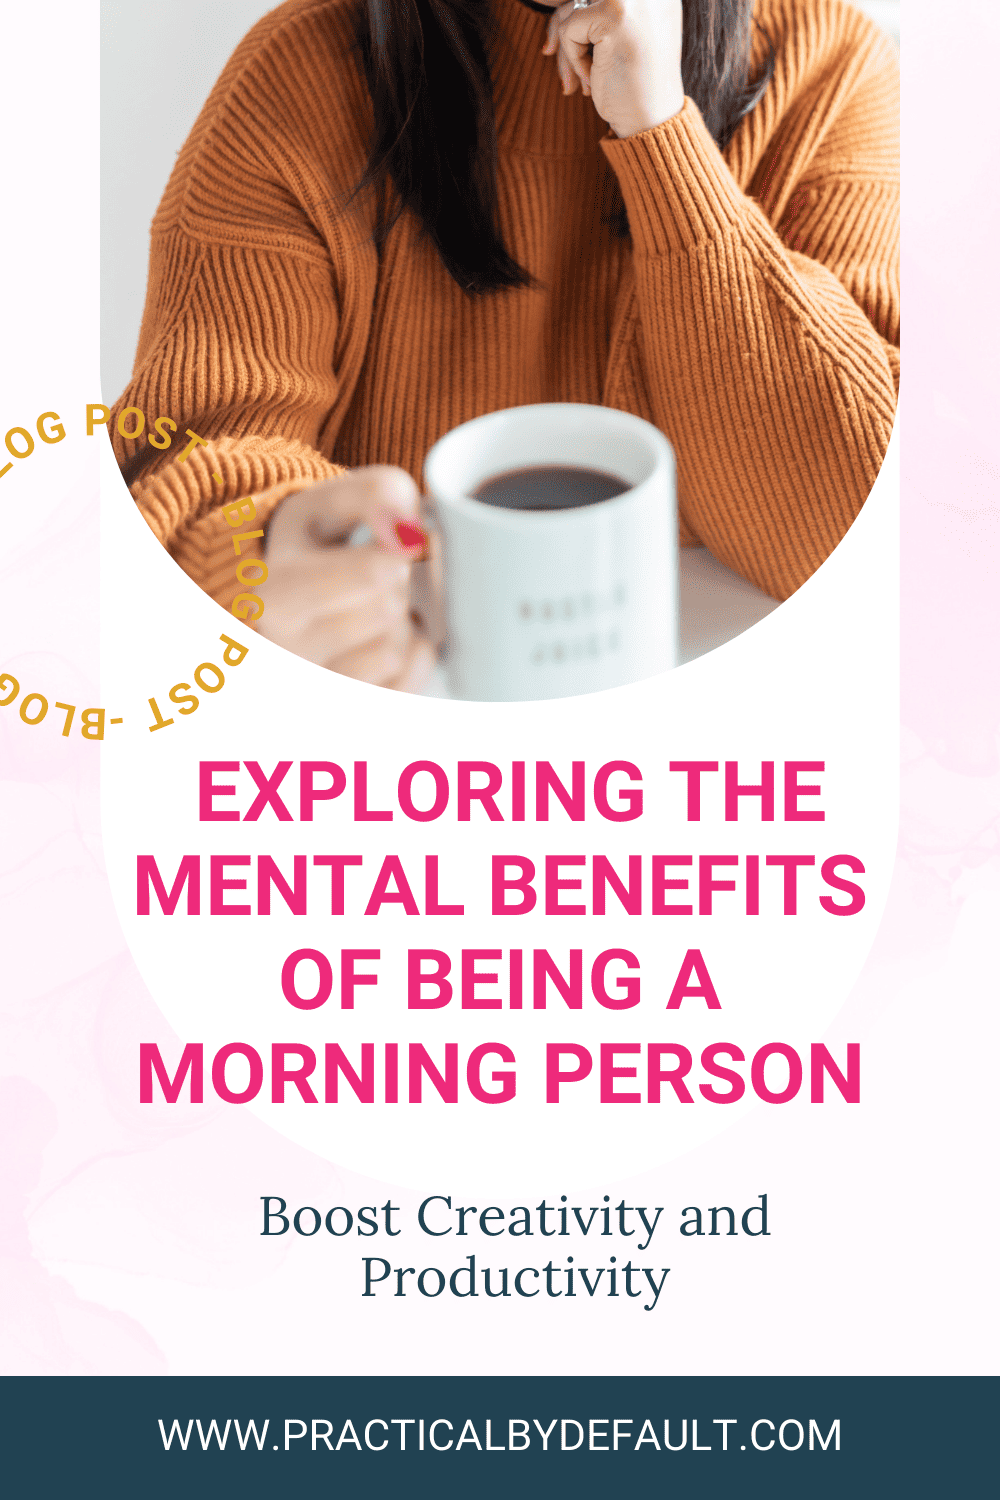 A focused woman in a cozy orange sweater enjoys a cup of coffee while writing, with the text overlay 'EXPLORING THE MENTAL BENEFITS OF BEING A MORNING PERSON - Boost Creativity and Productivity' and the website 'WWW.PRACTICALBYDEFAULT.COM' at the bottom